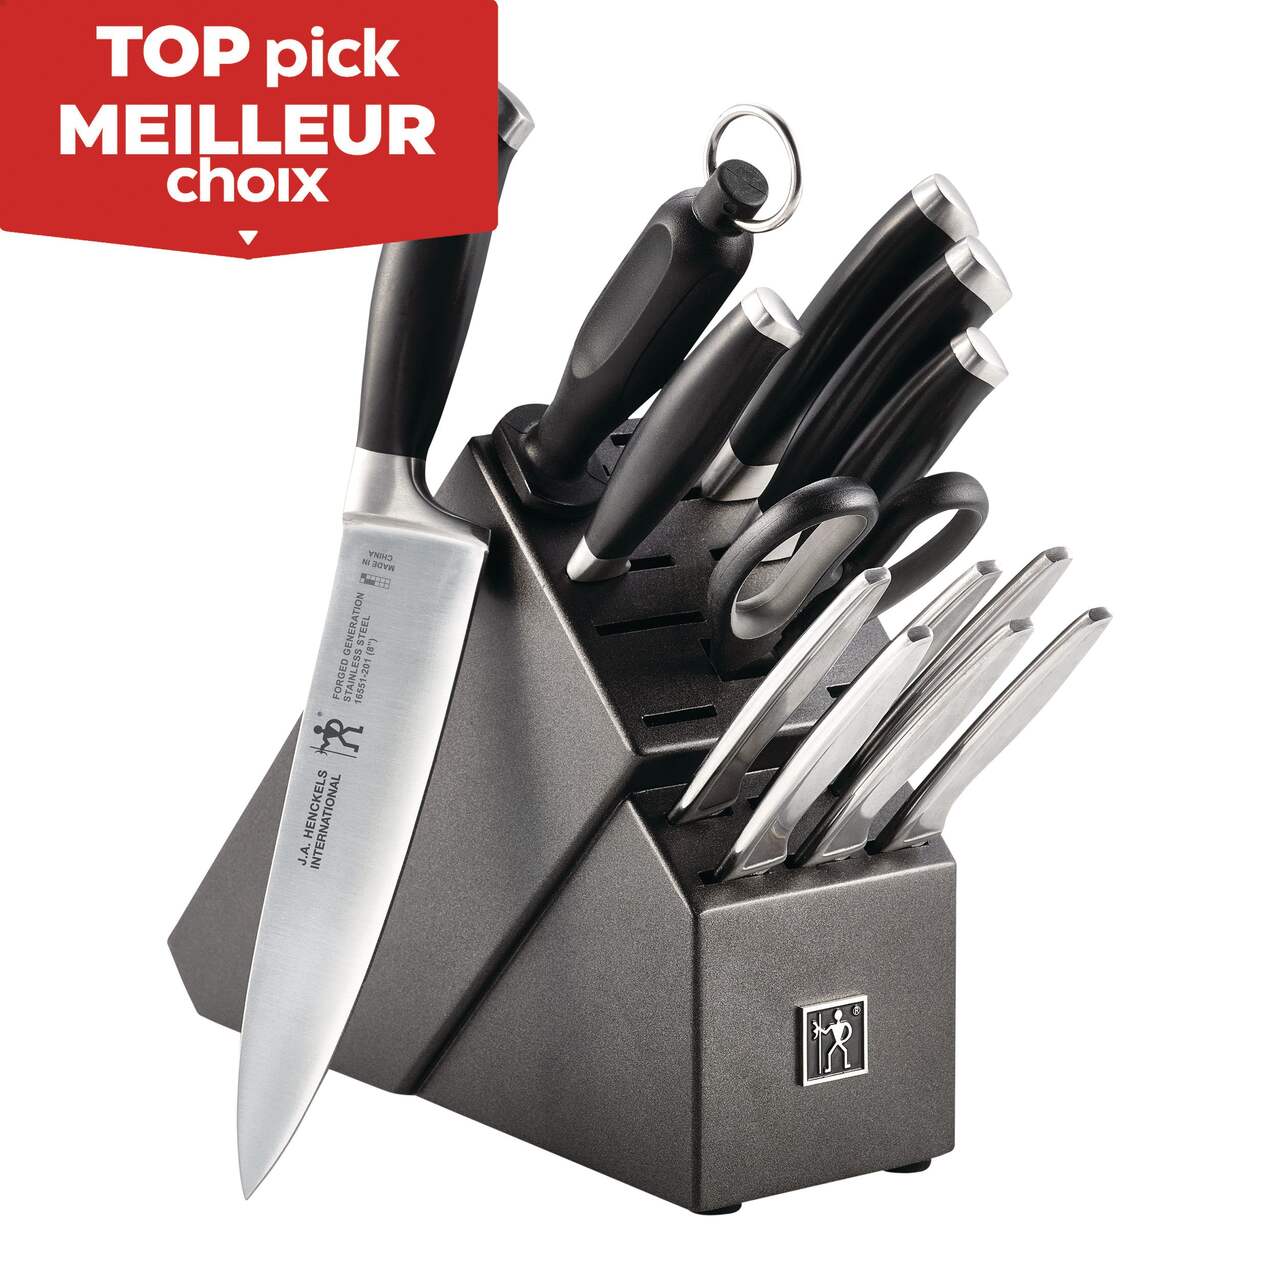 https://media-www.canadiantire.ca/product/living/kitchen/cutlery/0423911/14-piece-henckels-forged-knife-set-7c4ee5ce-aa20-42b4-b986-b00ebe2be1fc-jpgrendition.jpg?imdensity=1&imwidth=640&impolicy=mZoom